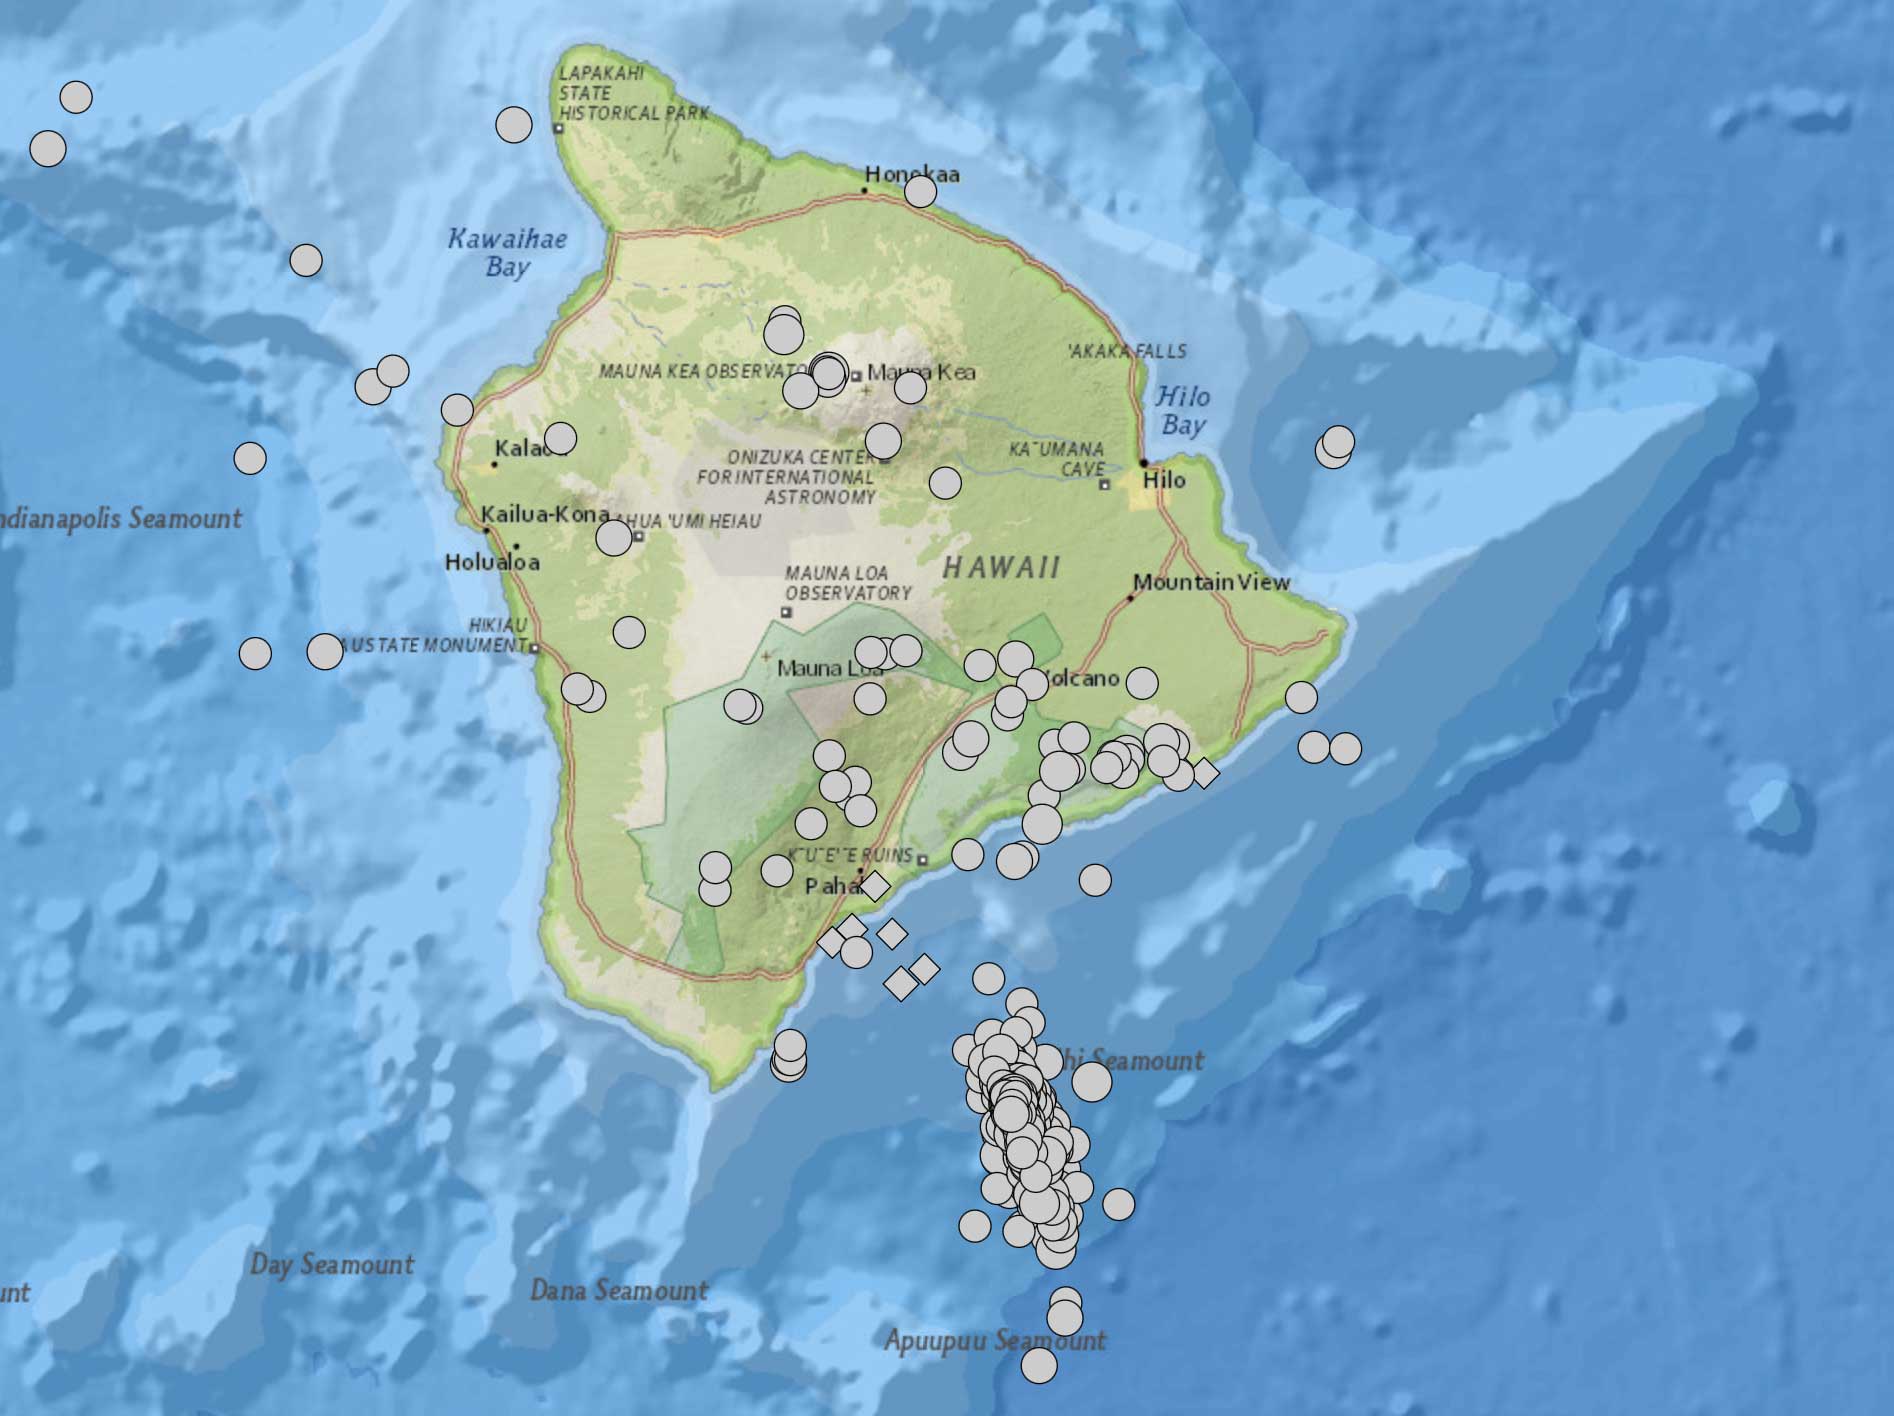 Map of Hawaii Island showing locations of earthquakes associated with a 1996 swarm.